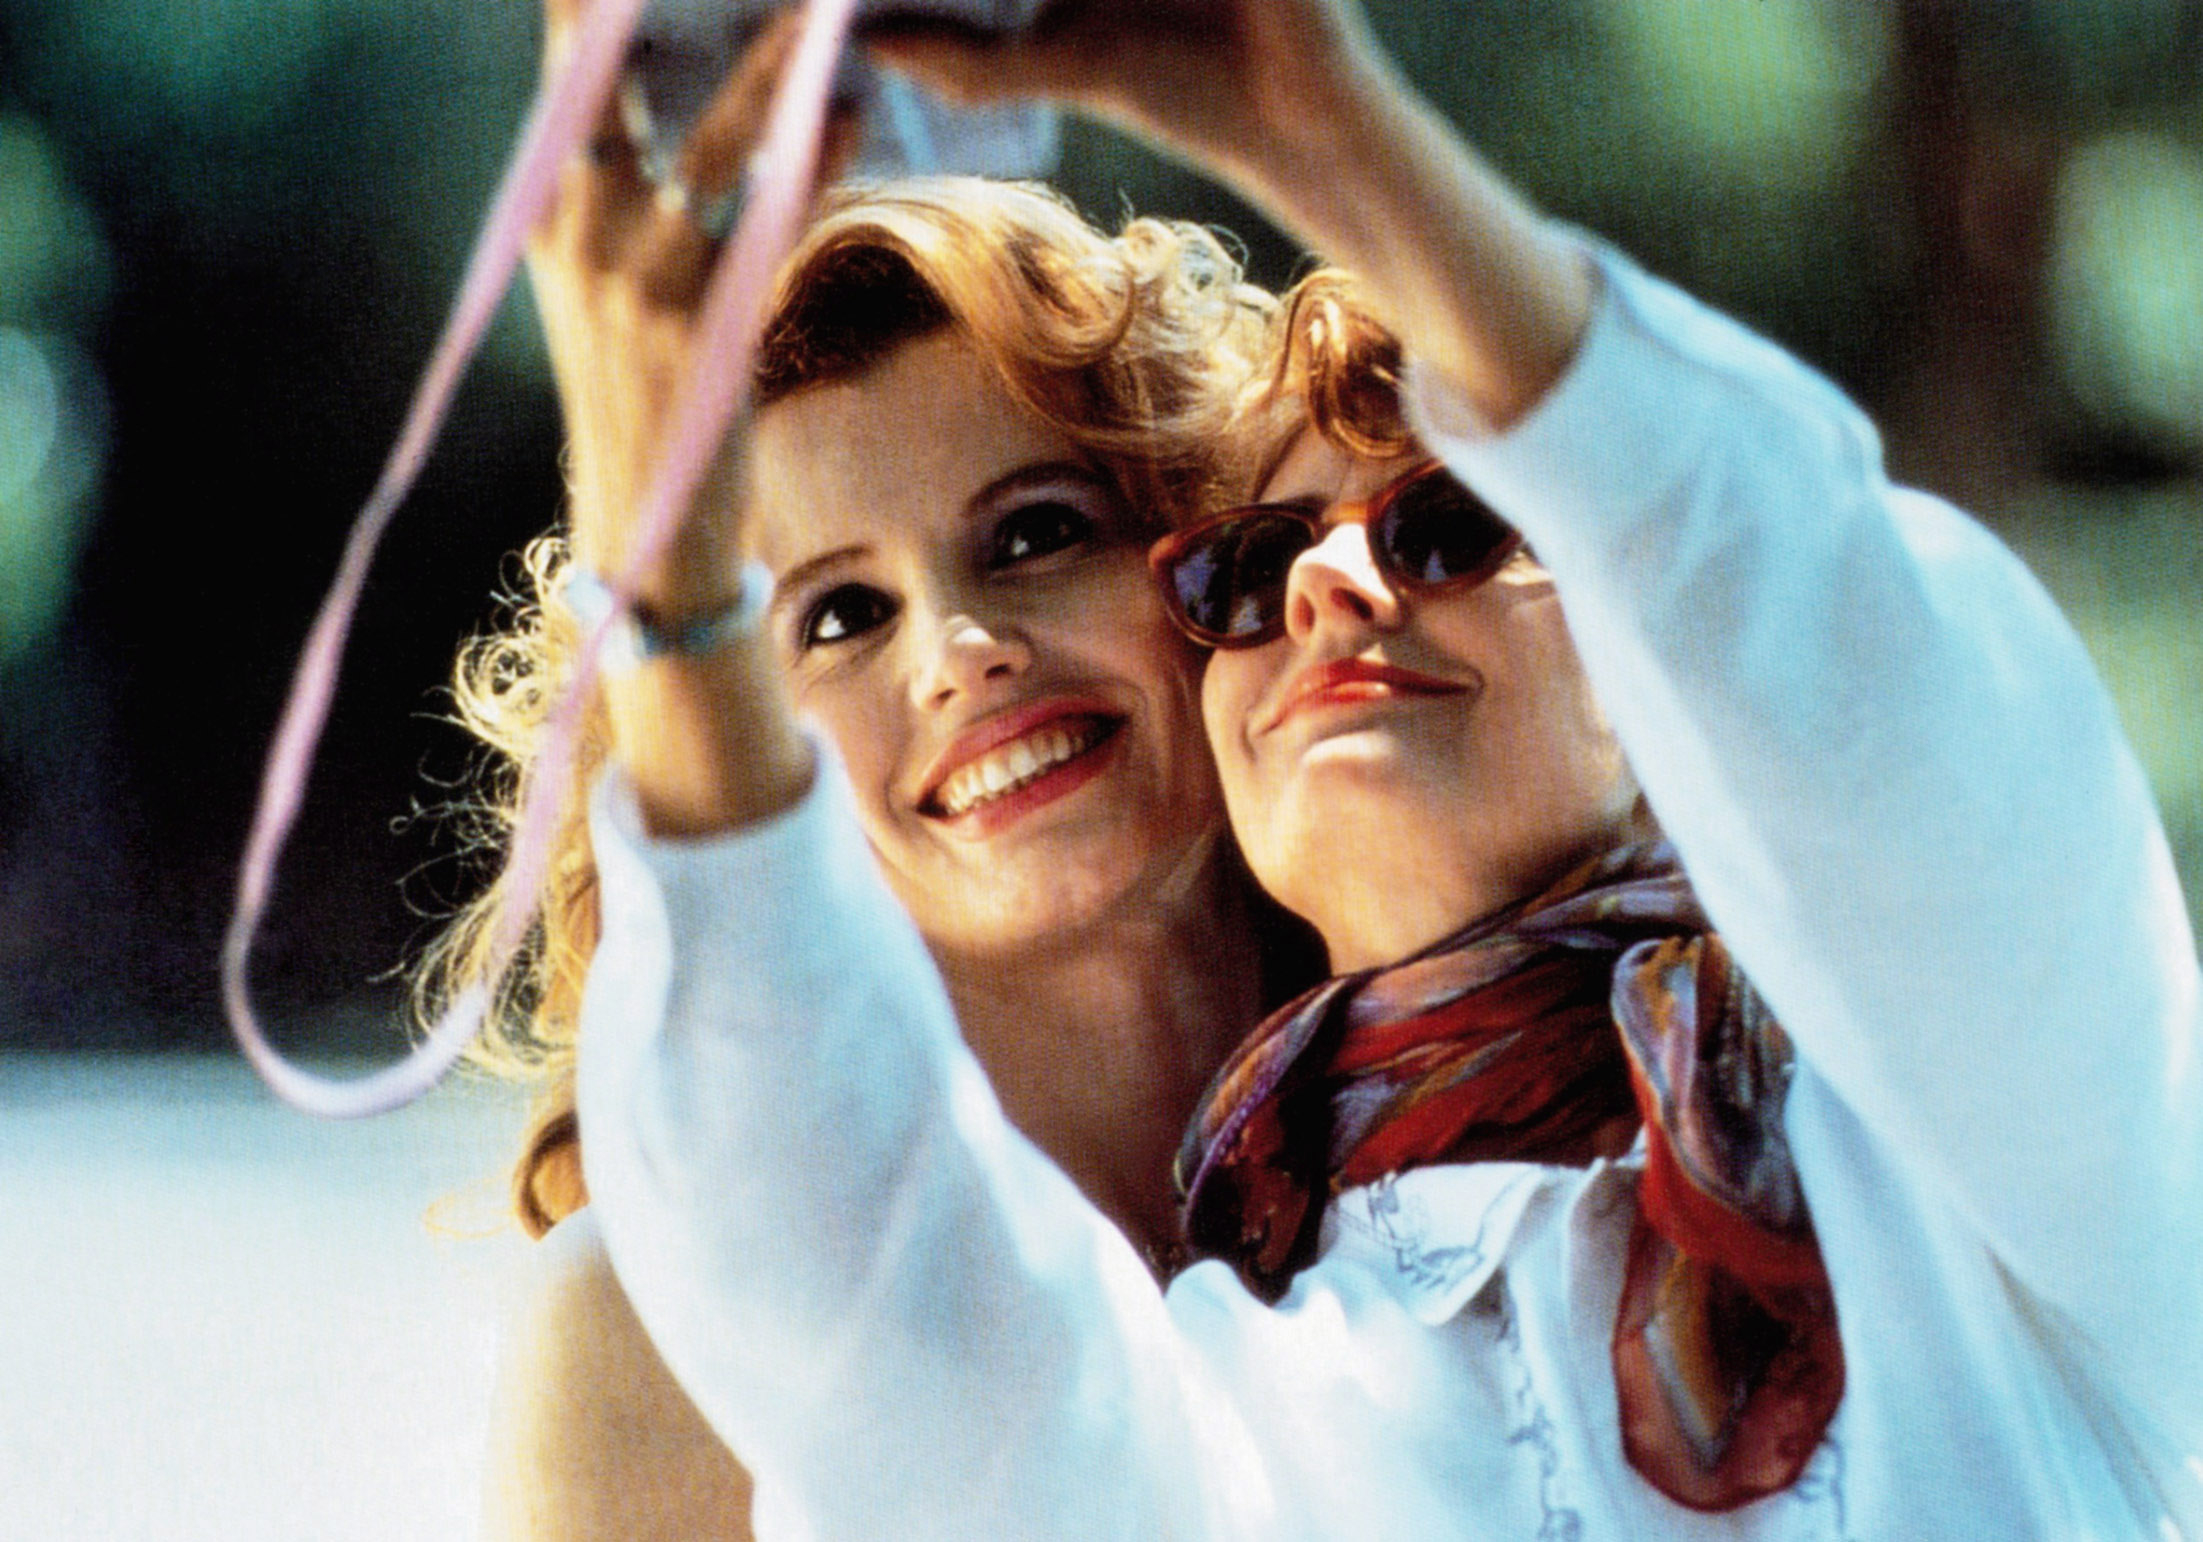 Two women smiling while taking a selfie, one wearing sunglasses and a scarf